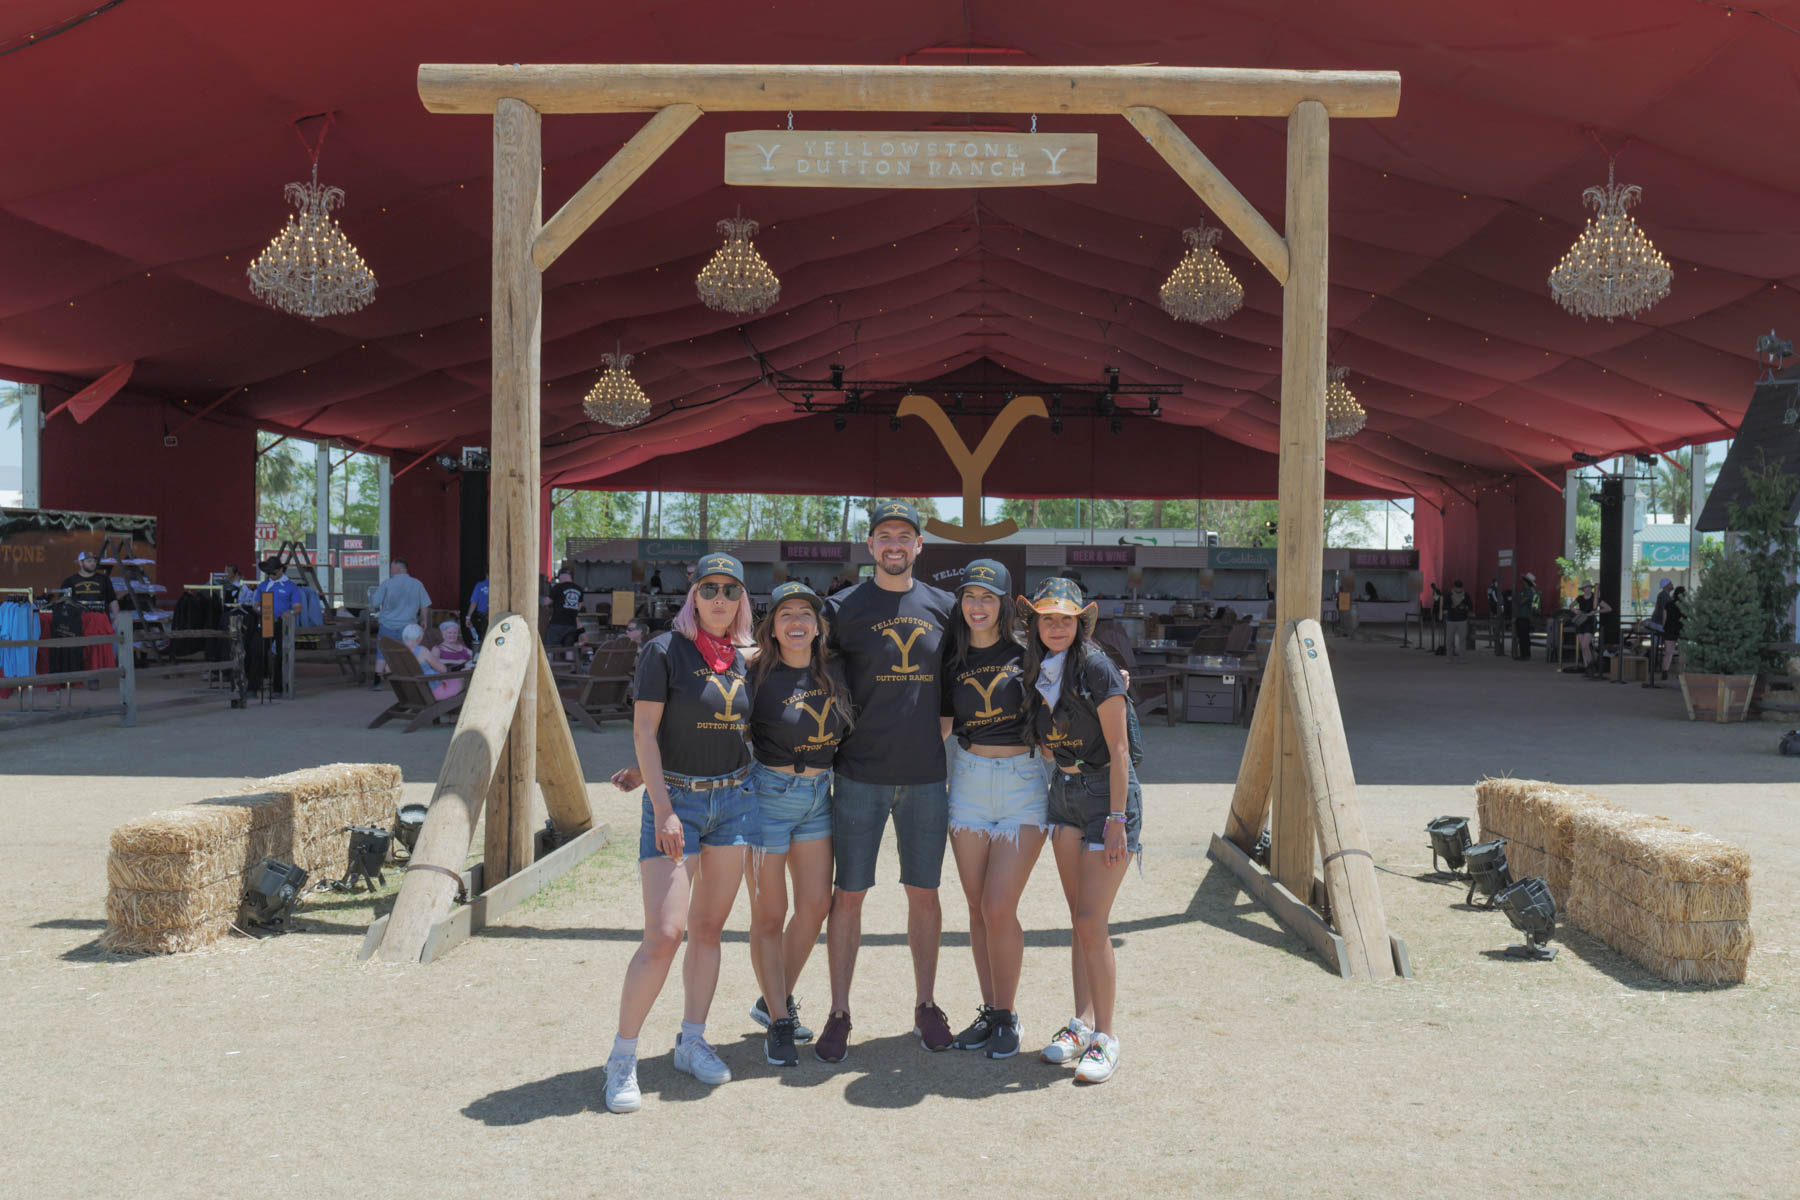 Brand ambassadors posing in front of the Yellowstone Dutton Ranch sign at the entrance of the activation.